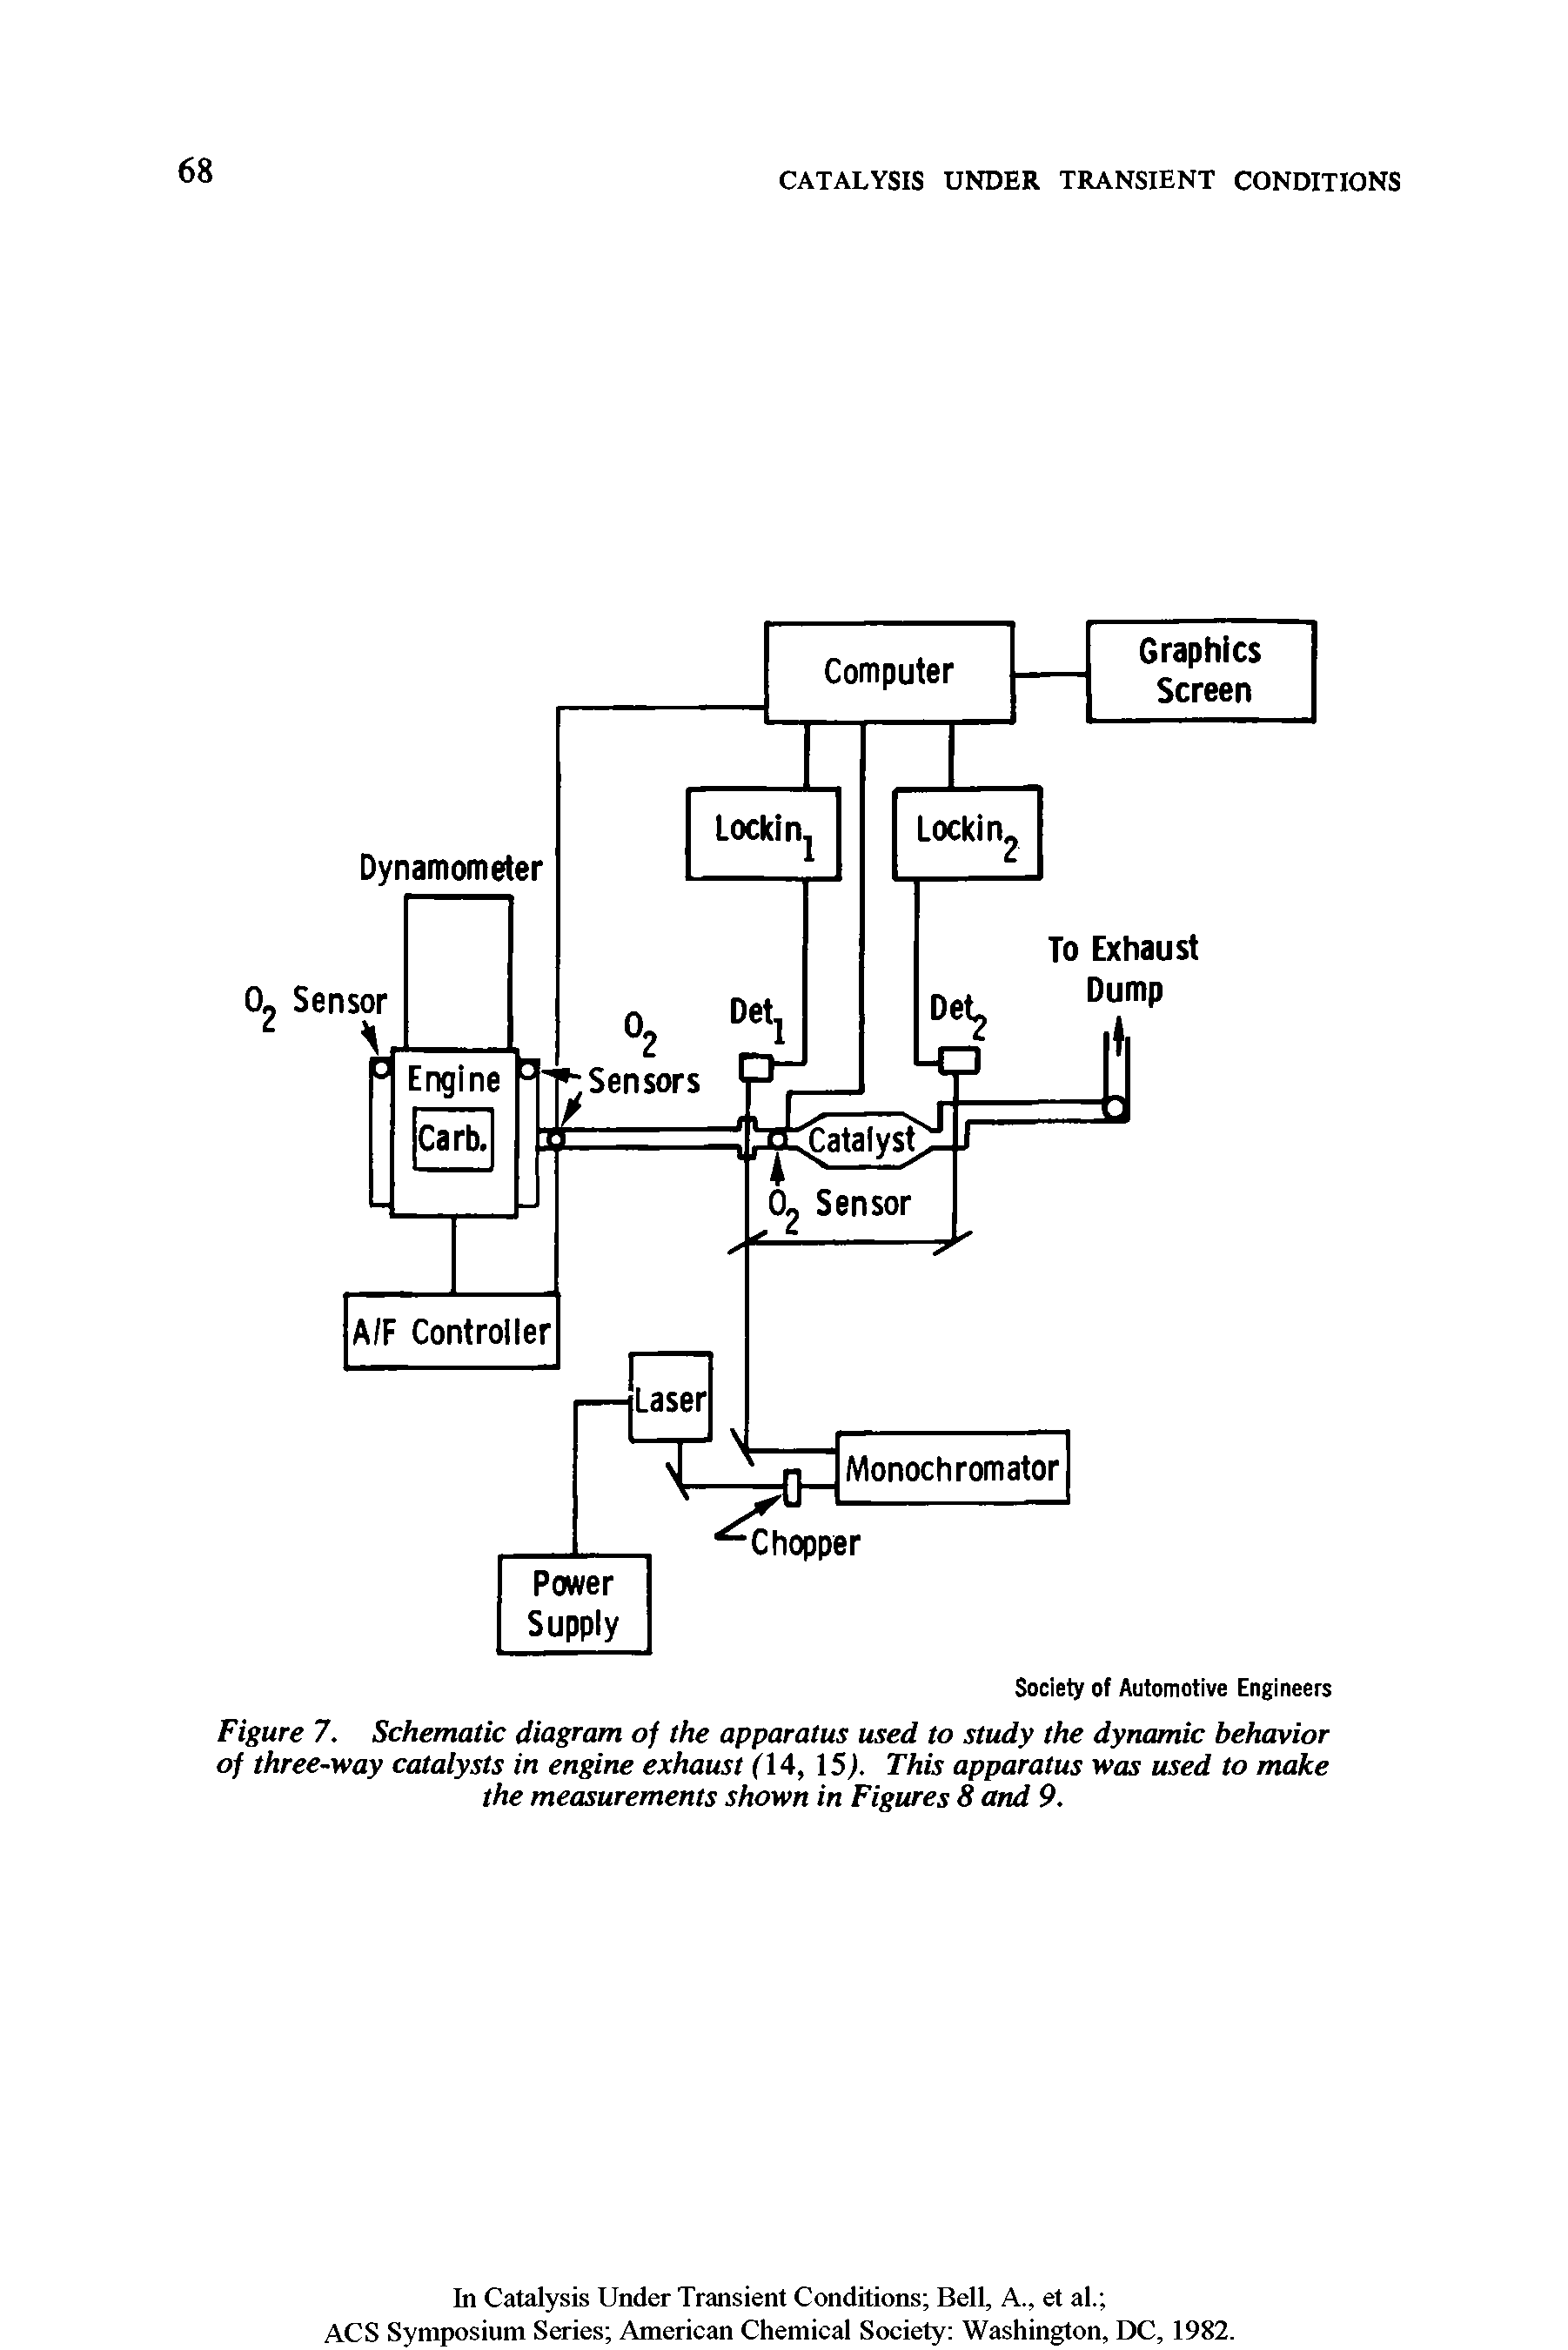 Figure 7. Schematic diagram of the apparatus used to study the dynamic behavior of three-way catalysts in engine exhaust (14, 15j. This apparatus was used to make the measurements shown in Figures 8 and 9.